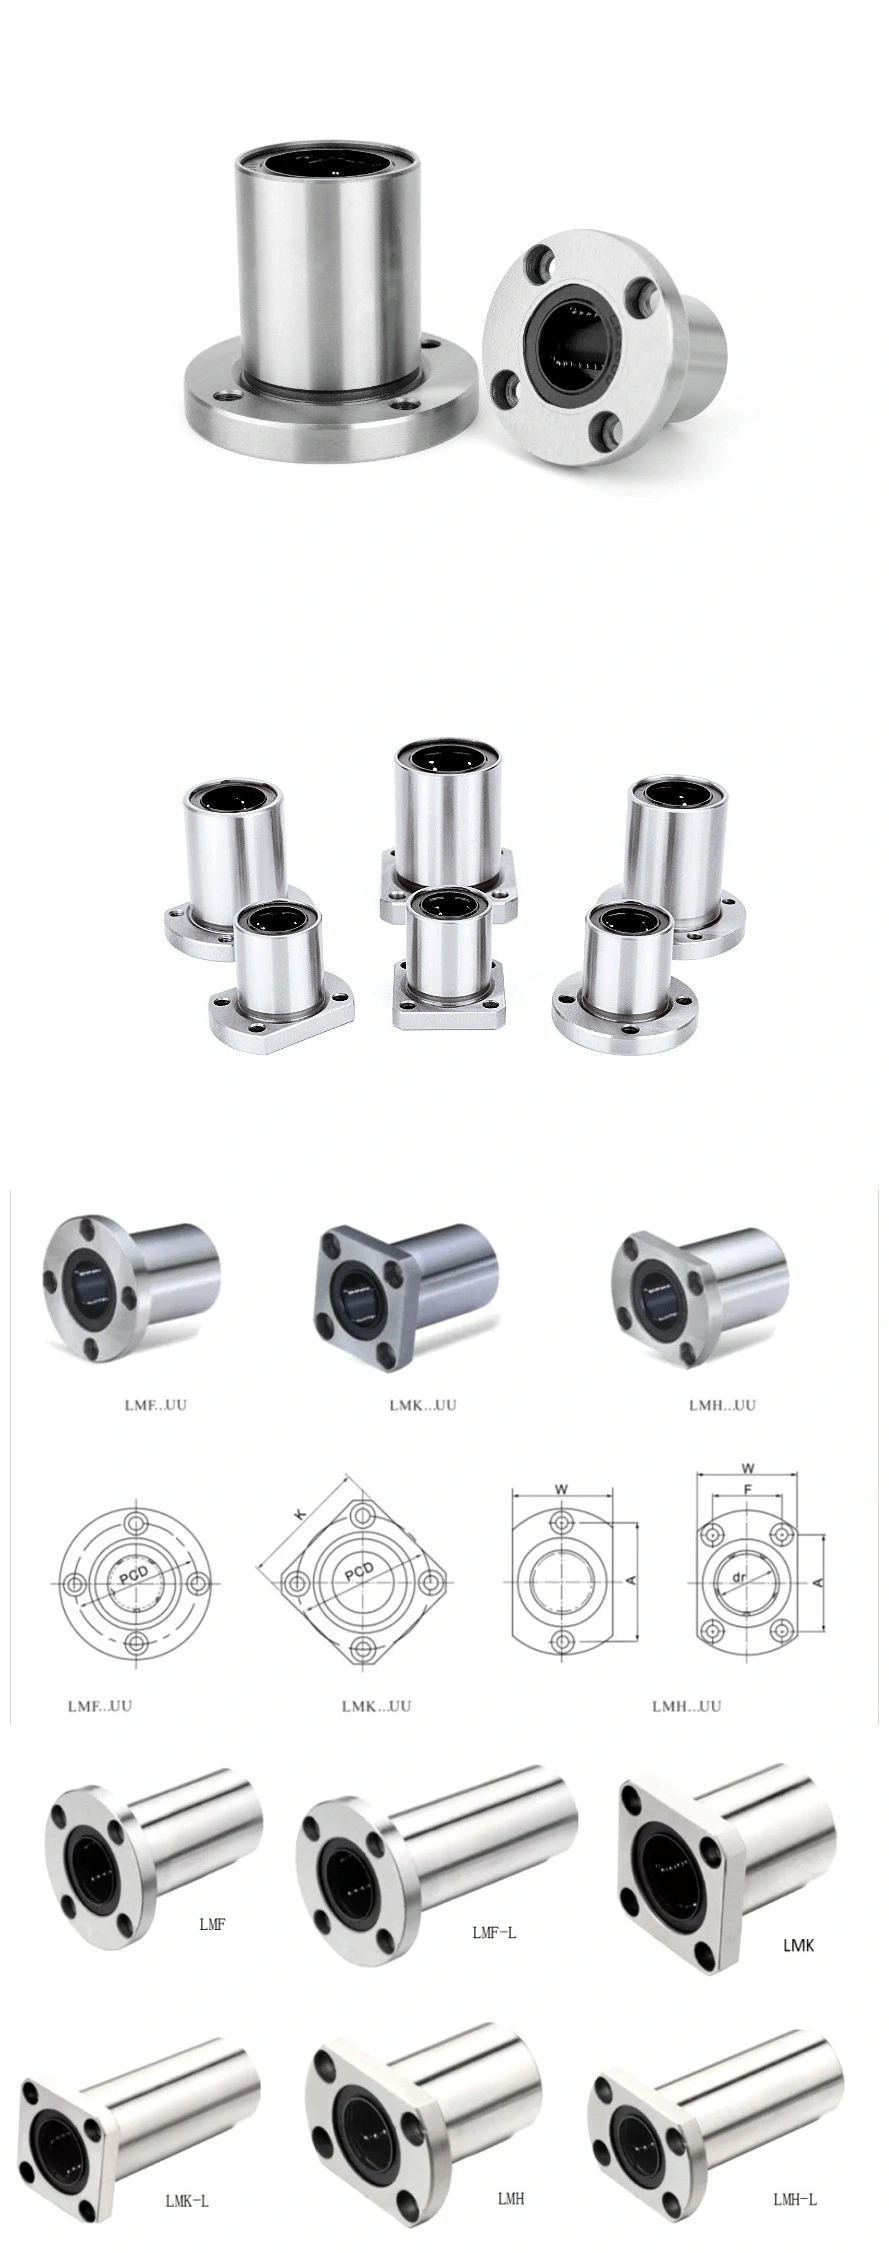 Chinese Factory Zkzf Special Linear Bearings Lme40 Lme50uu Lme60uu Linear Bearings Round/Square Base Shape Bearings